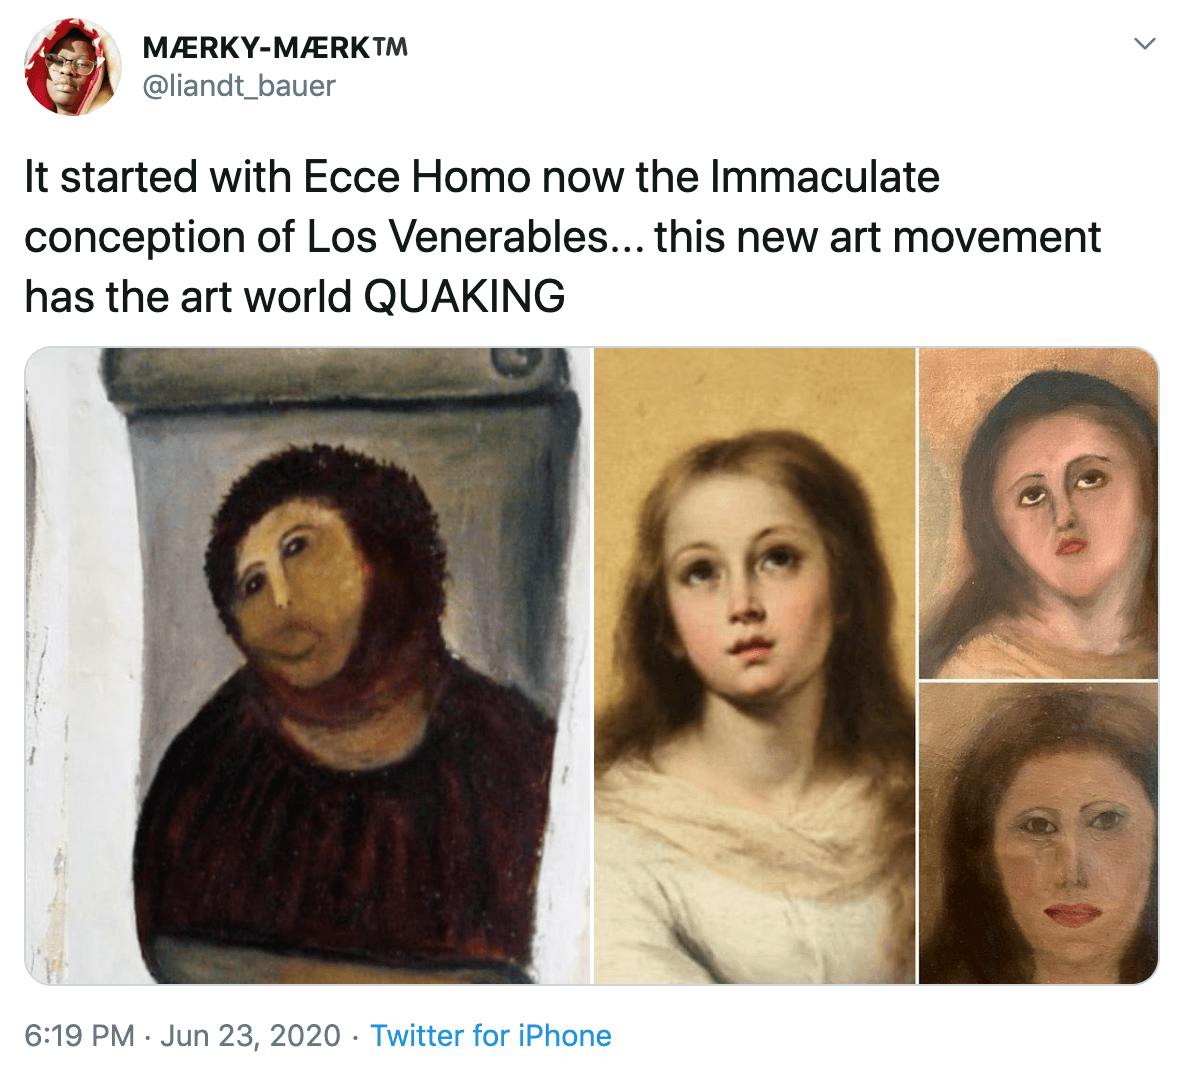 It started with Ecce Homo now the Immaculate conception of Los Venerables... this new art movement has the art world QUAKING